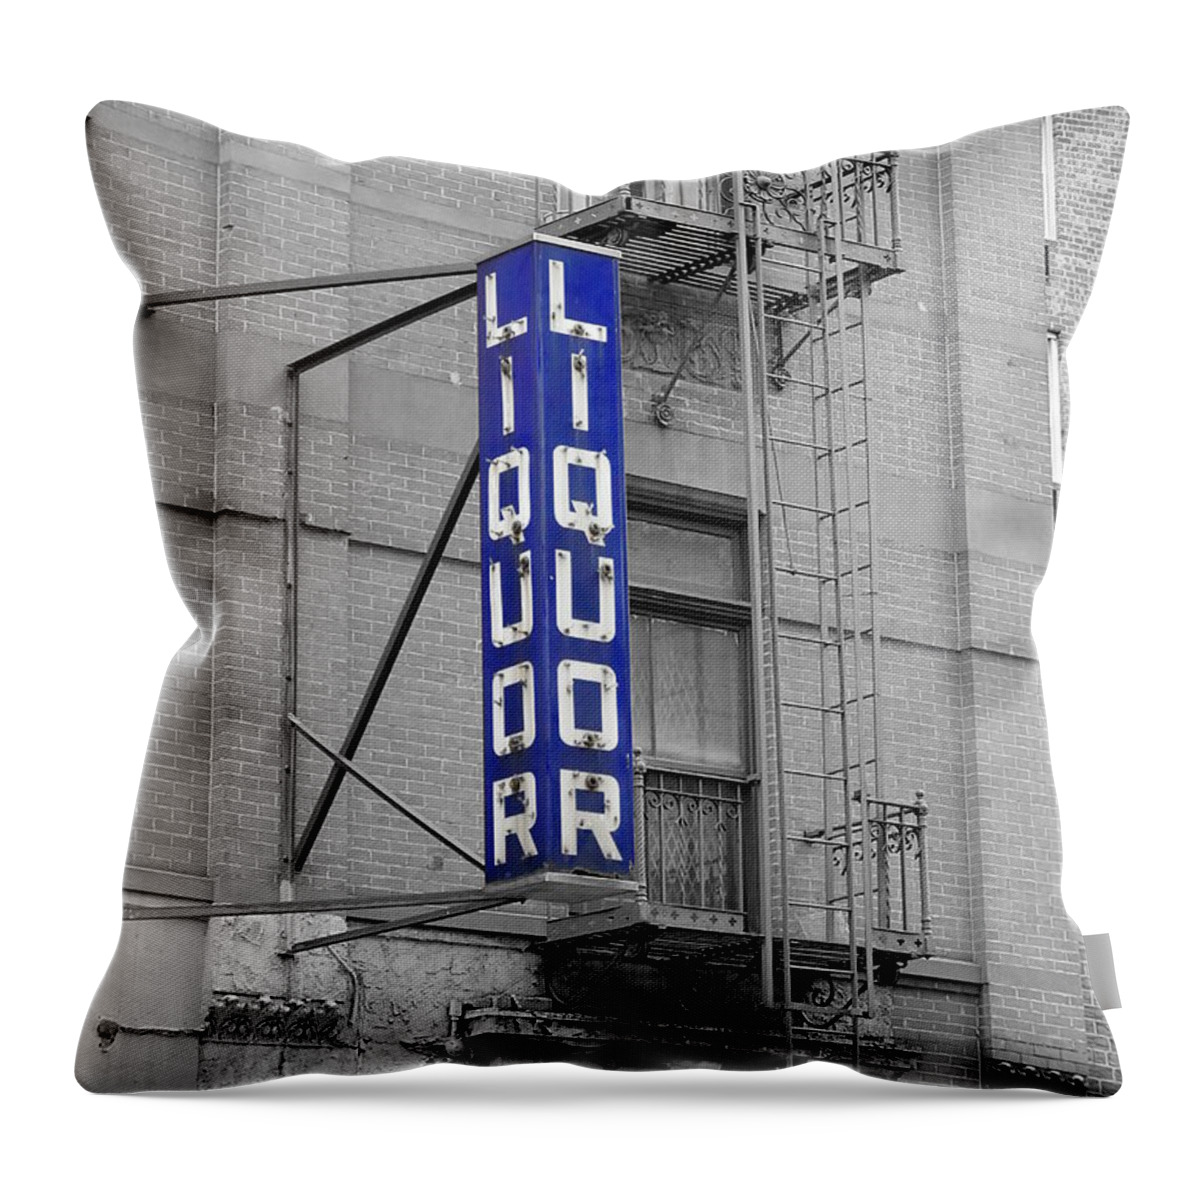 Richard Reeve Throw Pillow featuring the photograph Liquor Store NYC by Richard Reeve